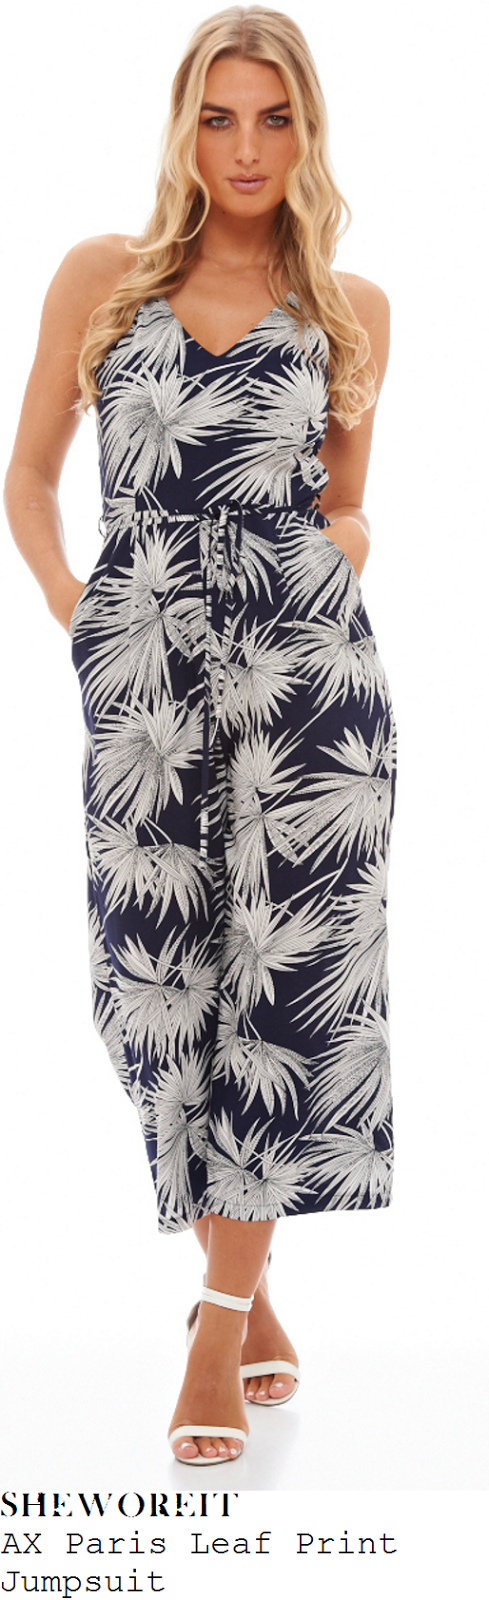 kate-wright-ax-paris-navy-blue-and-white-leaf-print-sleeveless-v-neck-wide-leg-culotte-jumpsuit